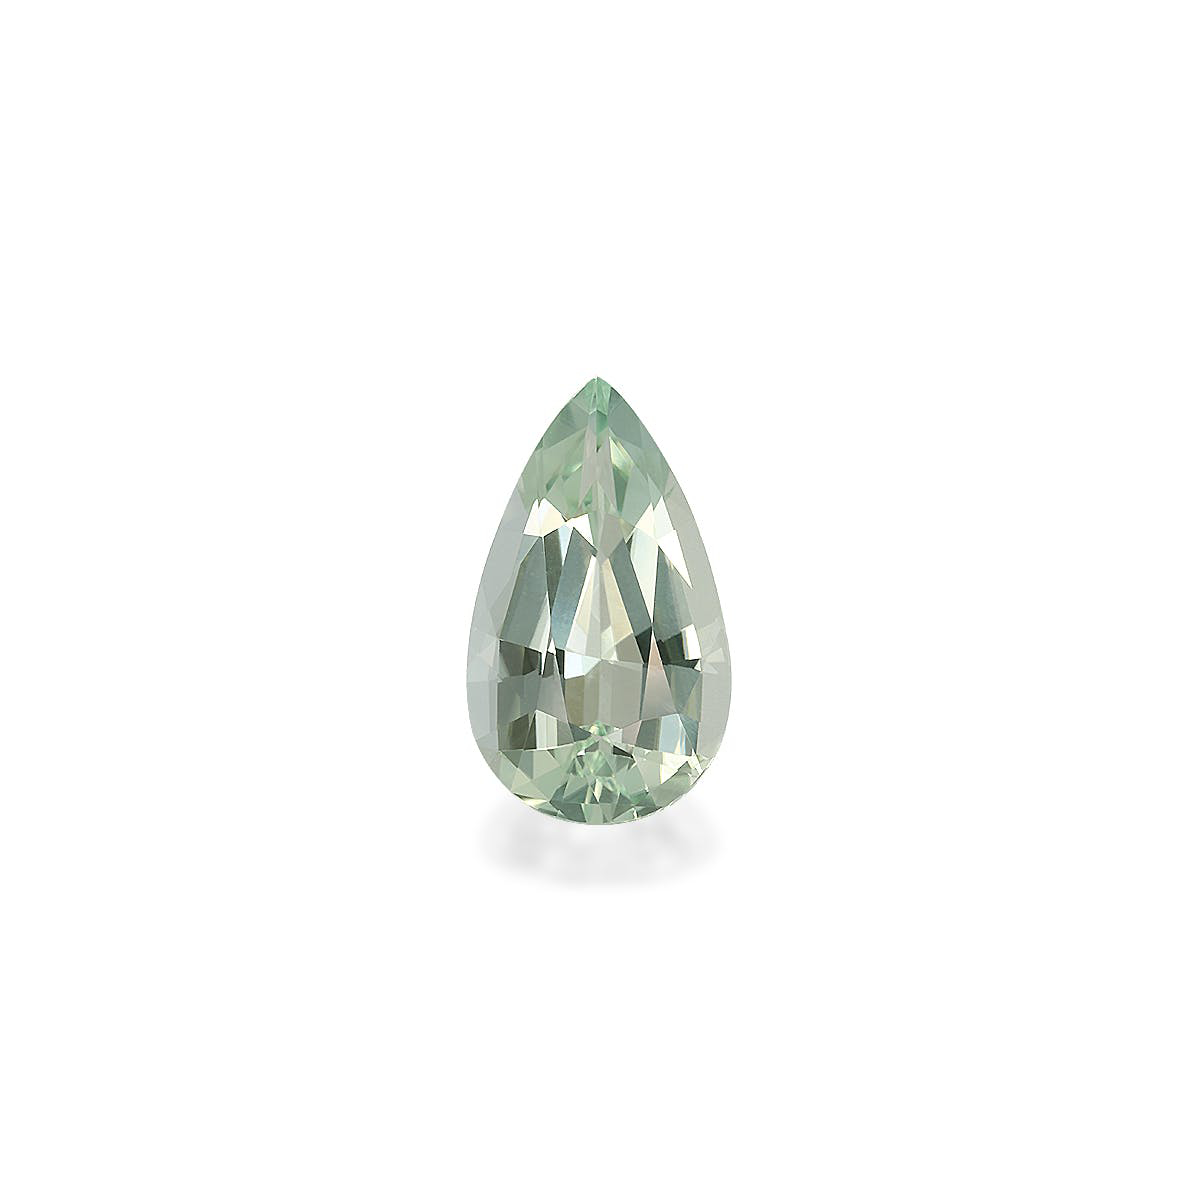 Picture of Mist Green Tourmaline 2.97ct (TG1587)